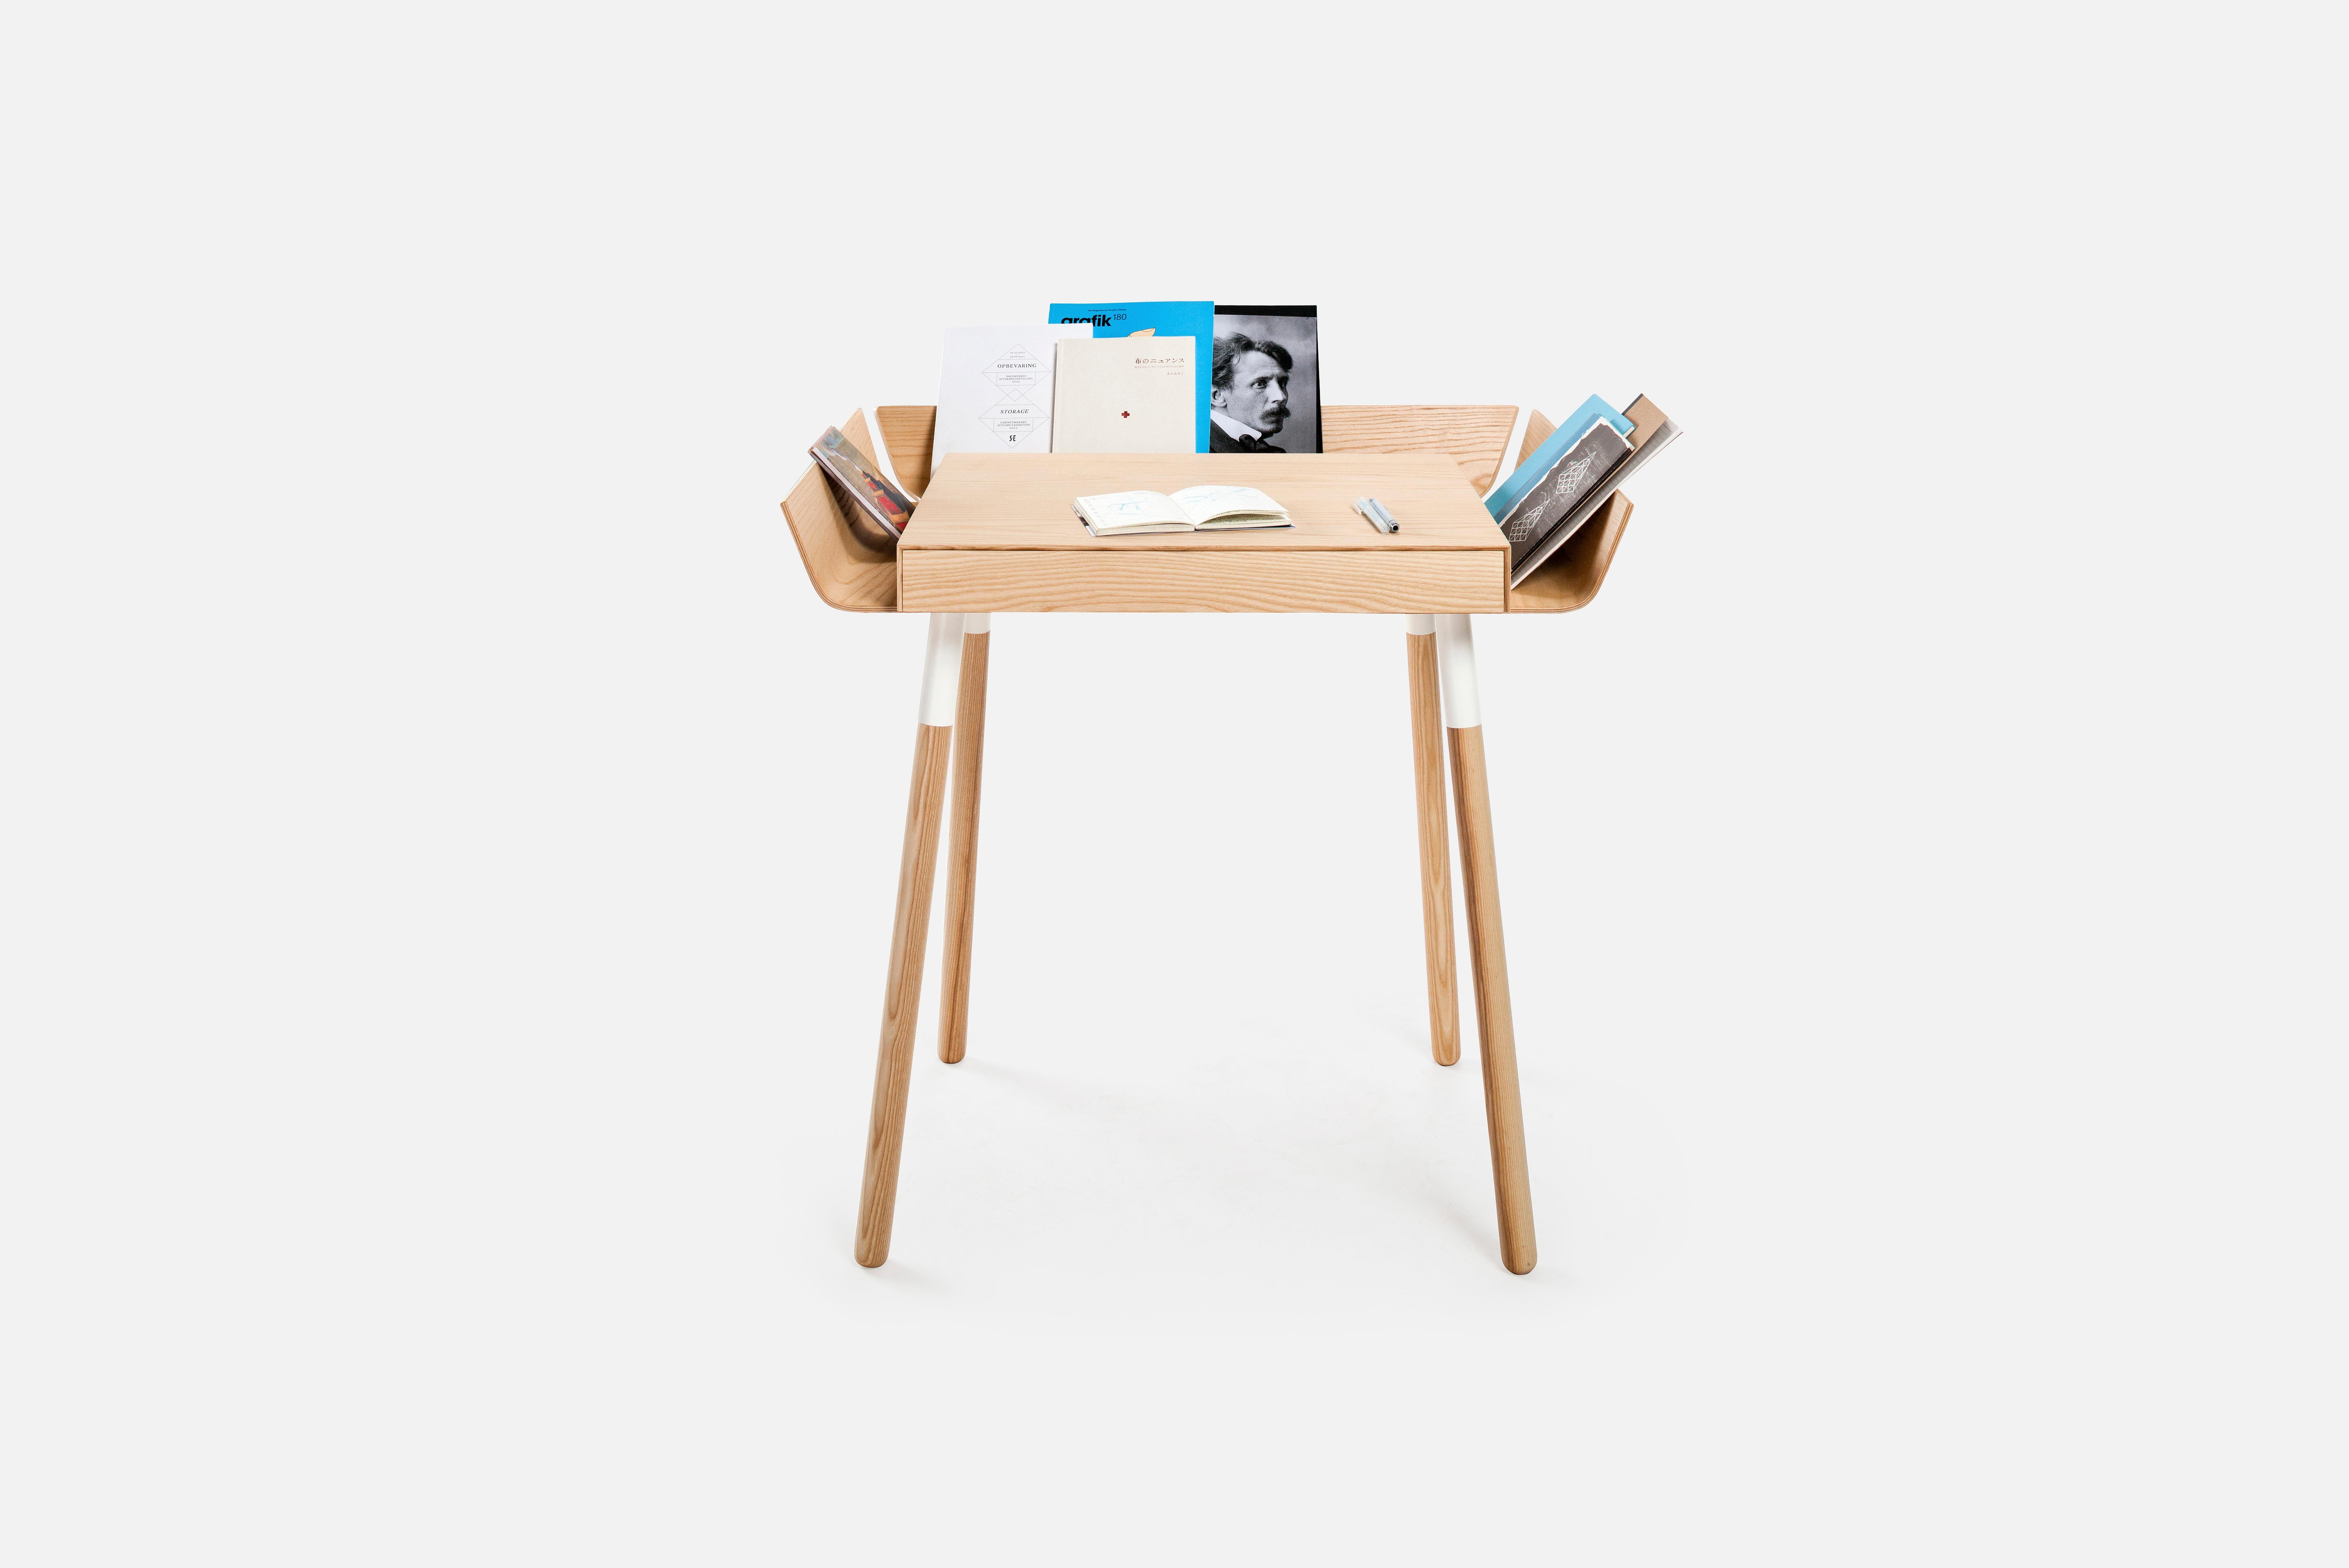 A writing desk, designed for working people. For creative people. People who know the value of efficient work.

While developing the idea of the my writing desk (MWD), designer Inesa Malafej had a clear goal – to reduce the chaotic clutter that